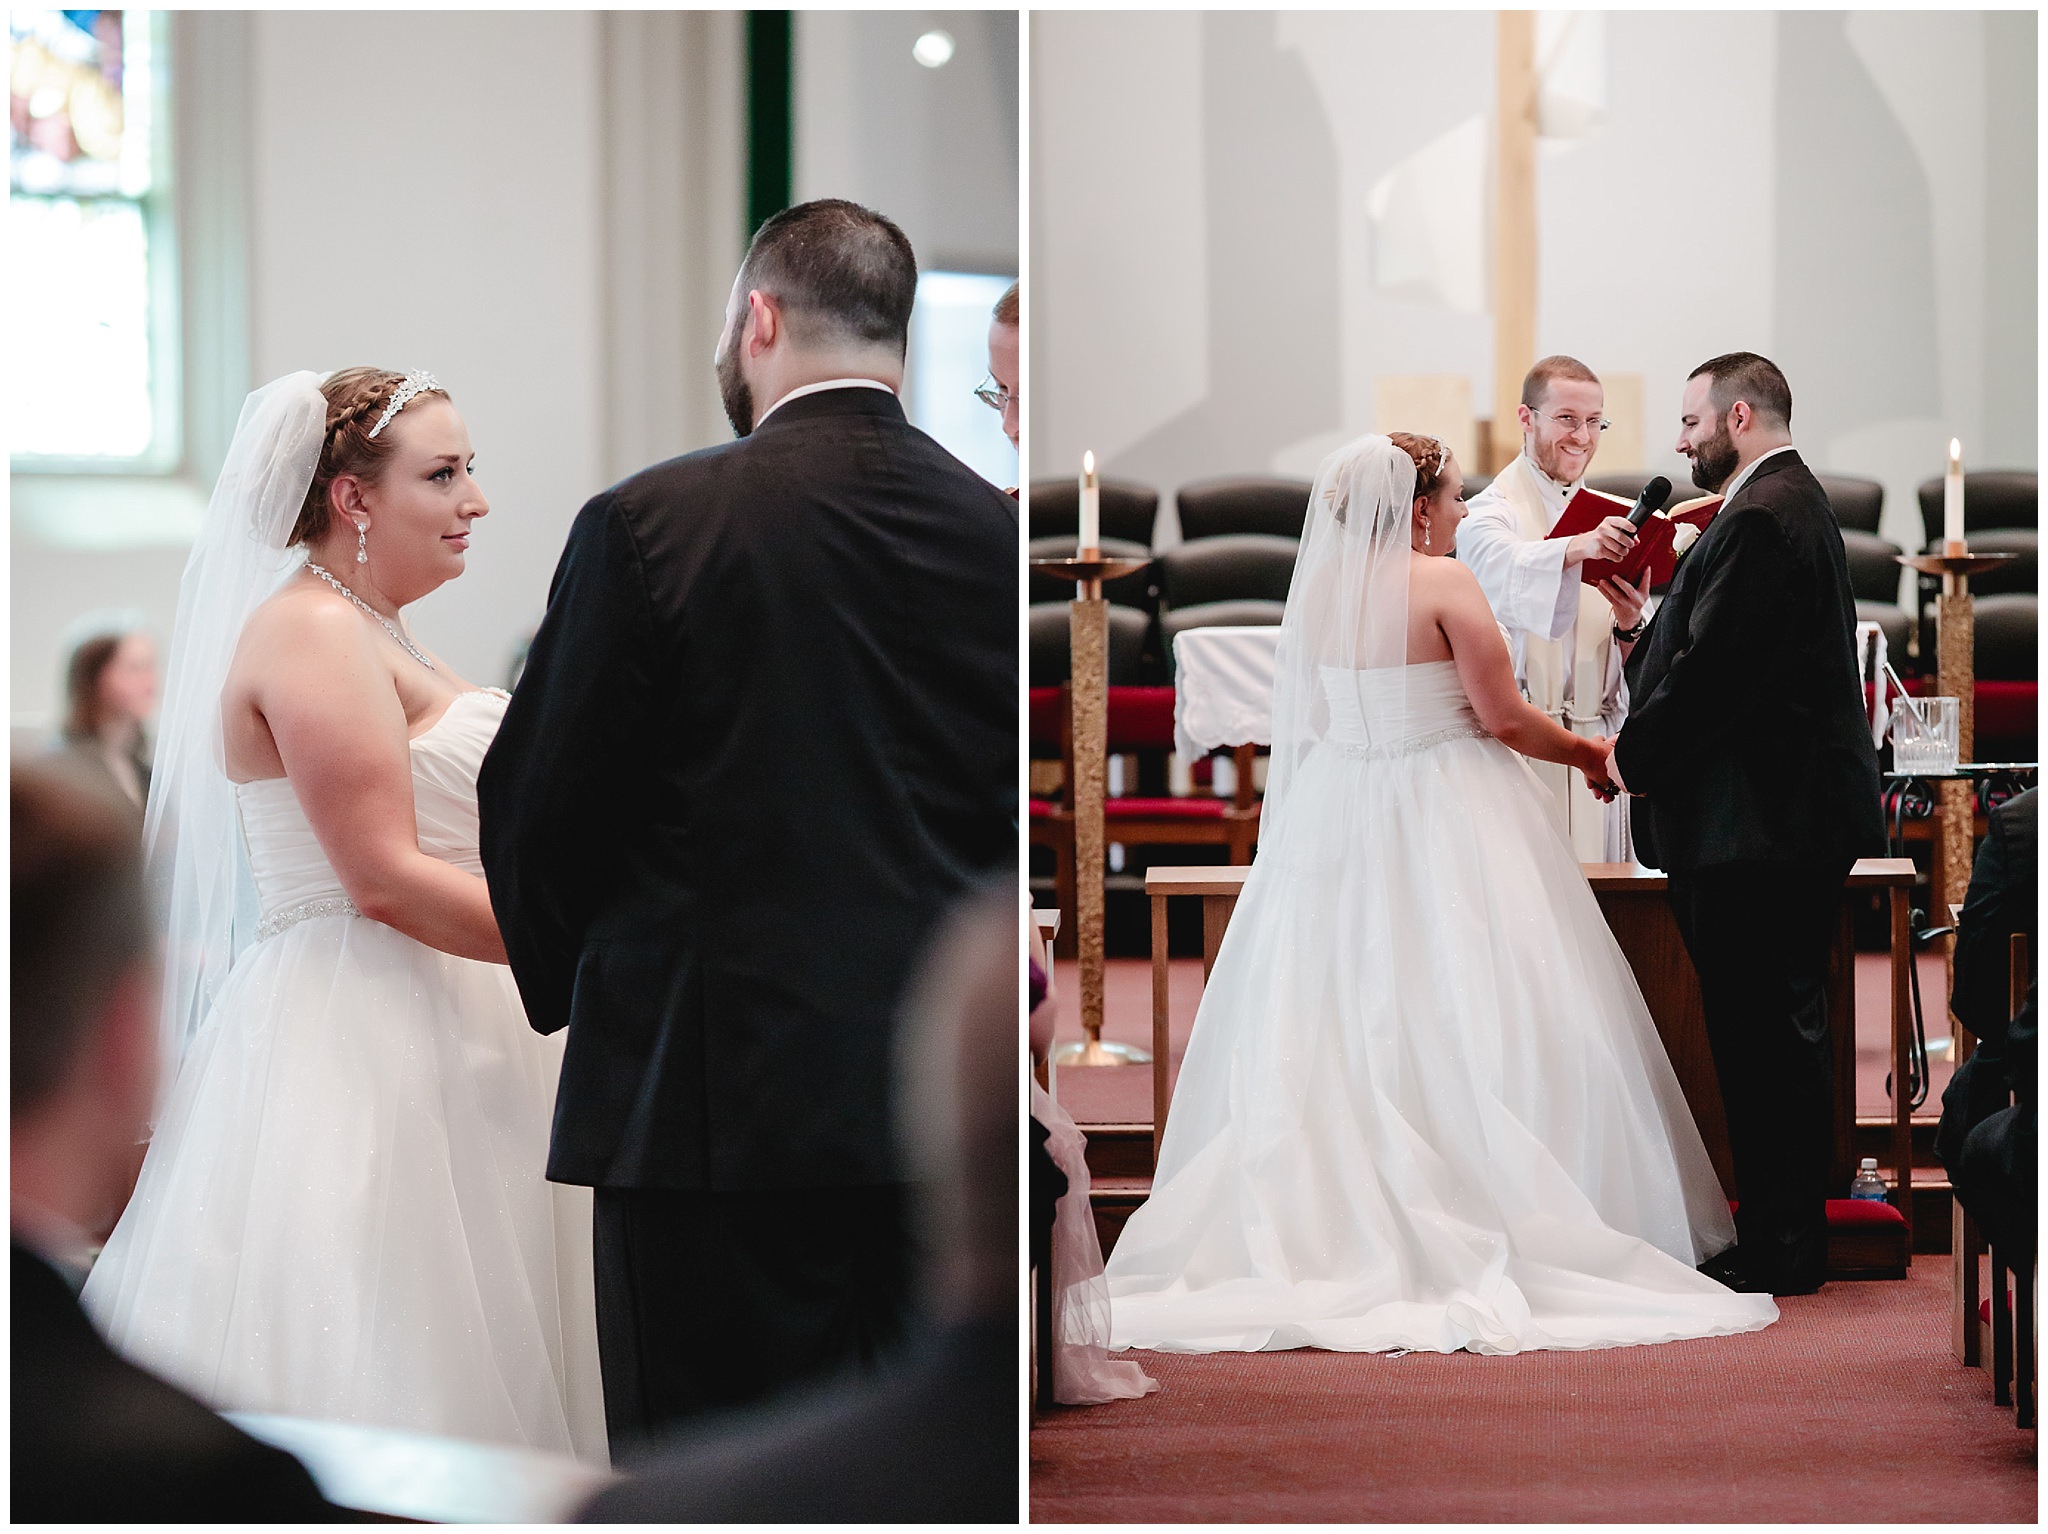 Exchanging of vows at Duquesne University